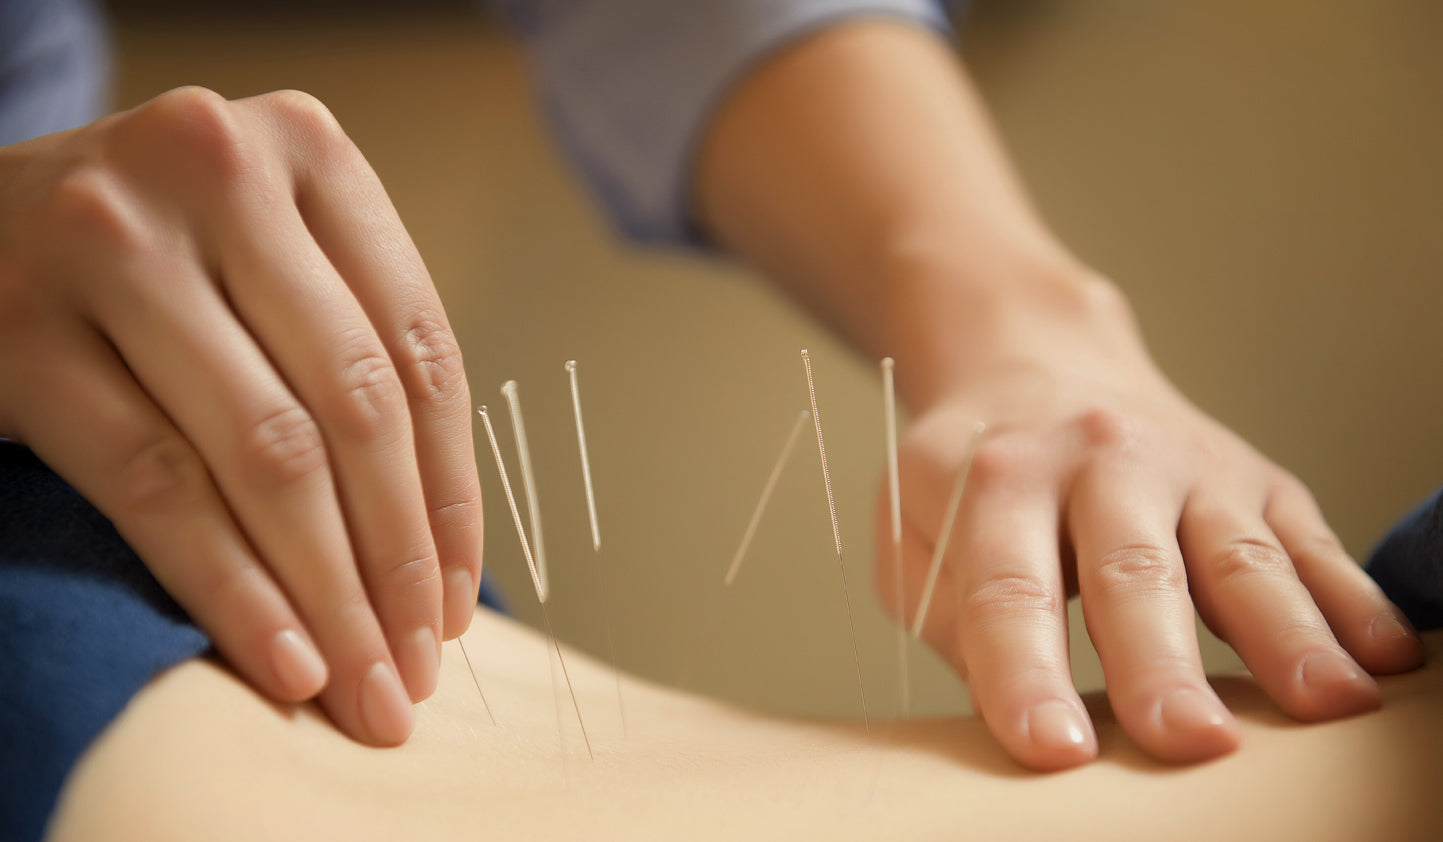 Are acupuncture needles reusable?